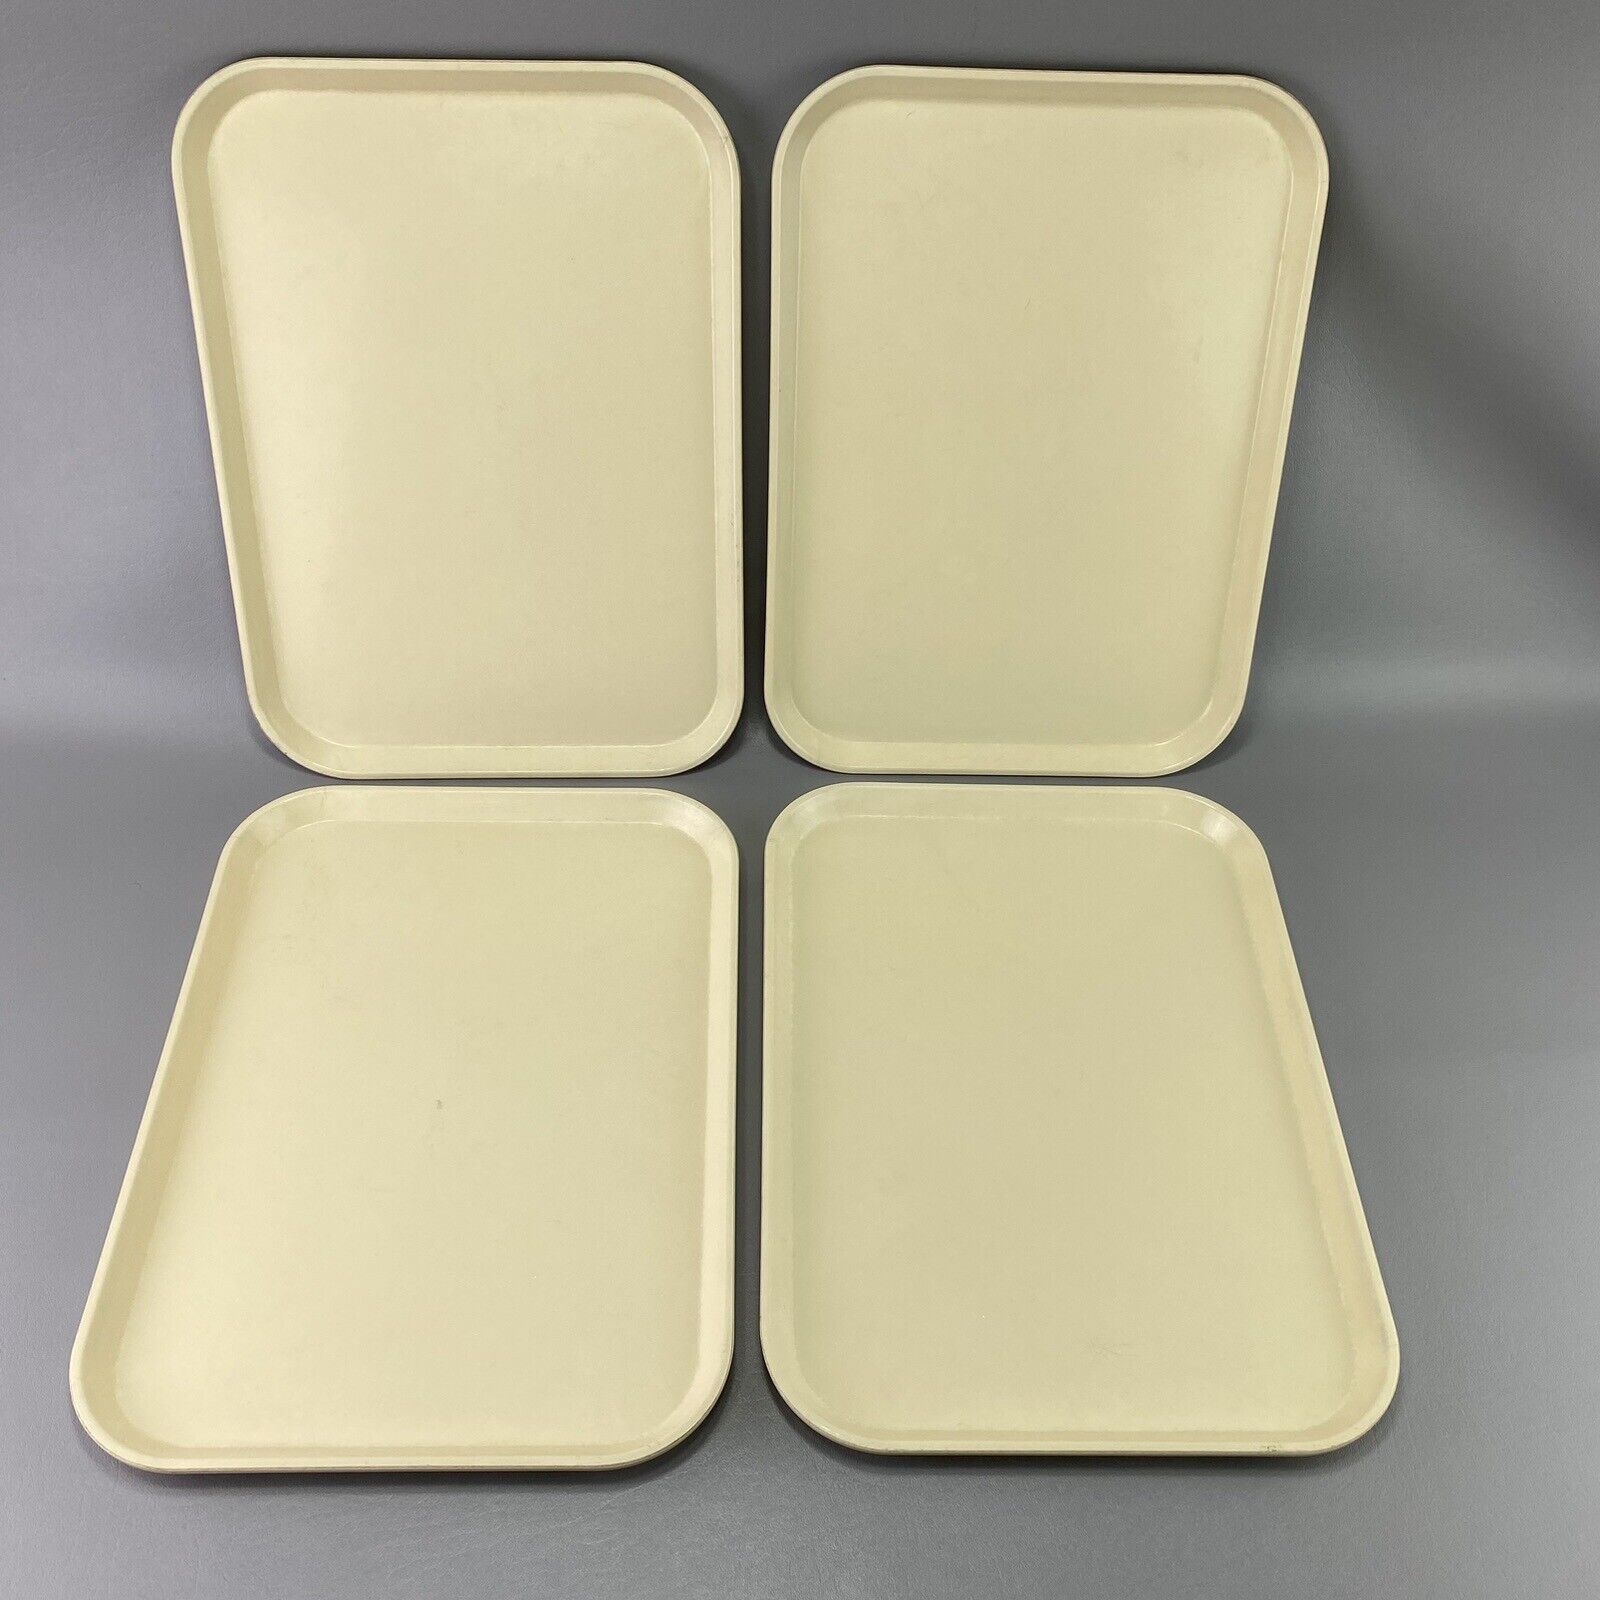 4 Vintage Cambro 12-3 Camtray Cream Colored Cafeteria Lunch Tray 16x12 NSF